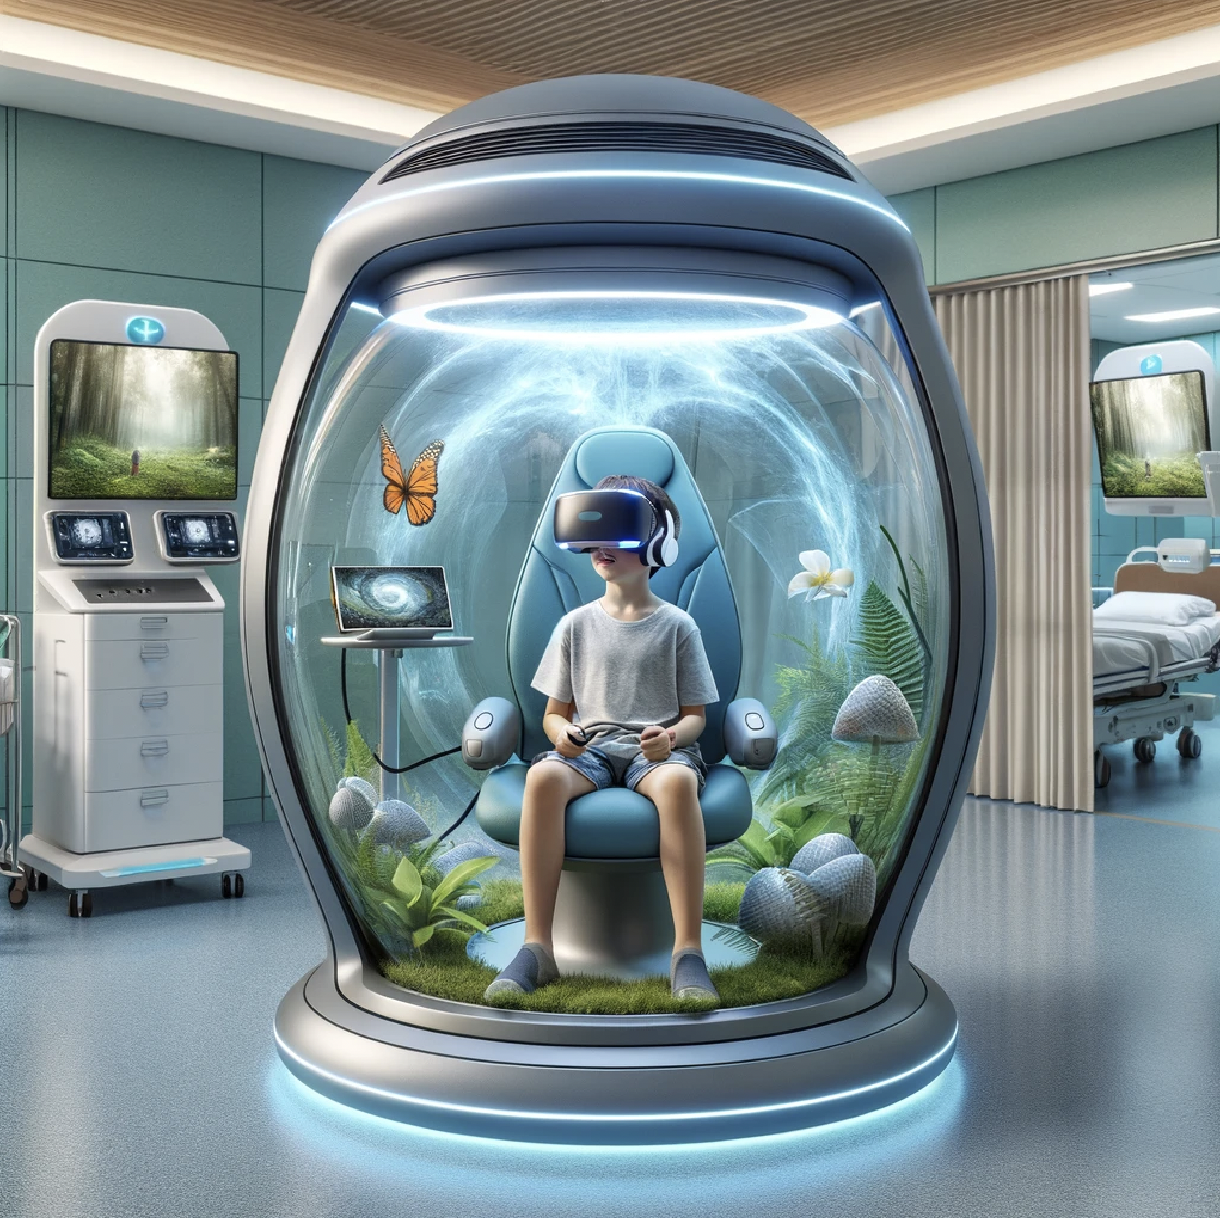 Child sitting in a VR pod having an immersive experience while in a hospital